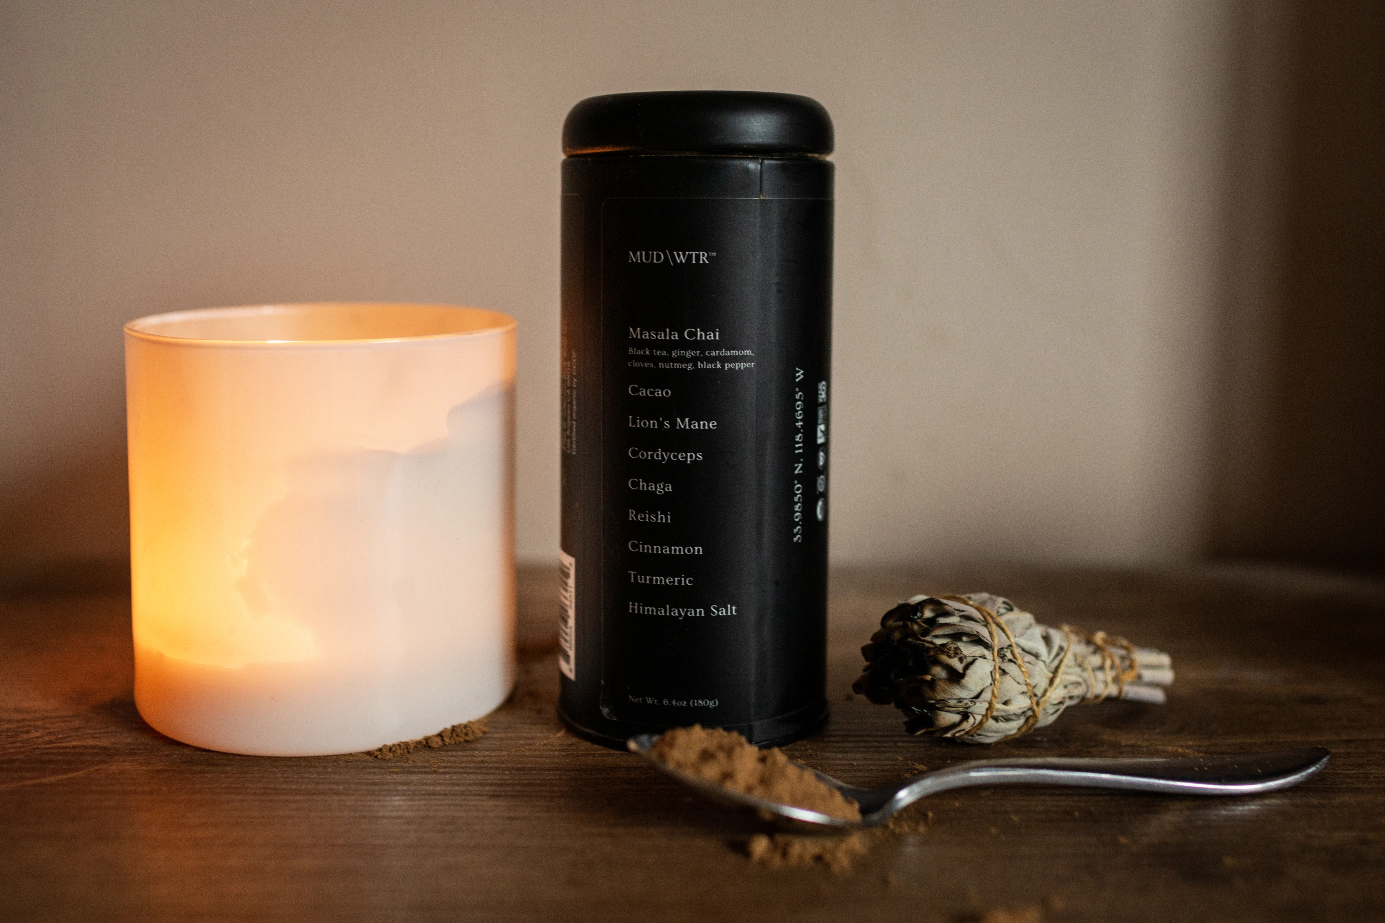 MUD/WTR Review –  A Coffee Alternative As Your Morning Ritual